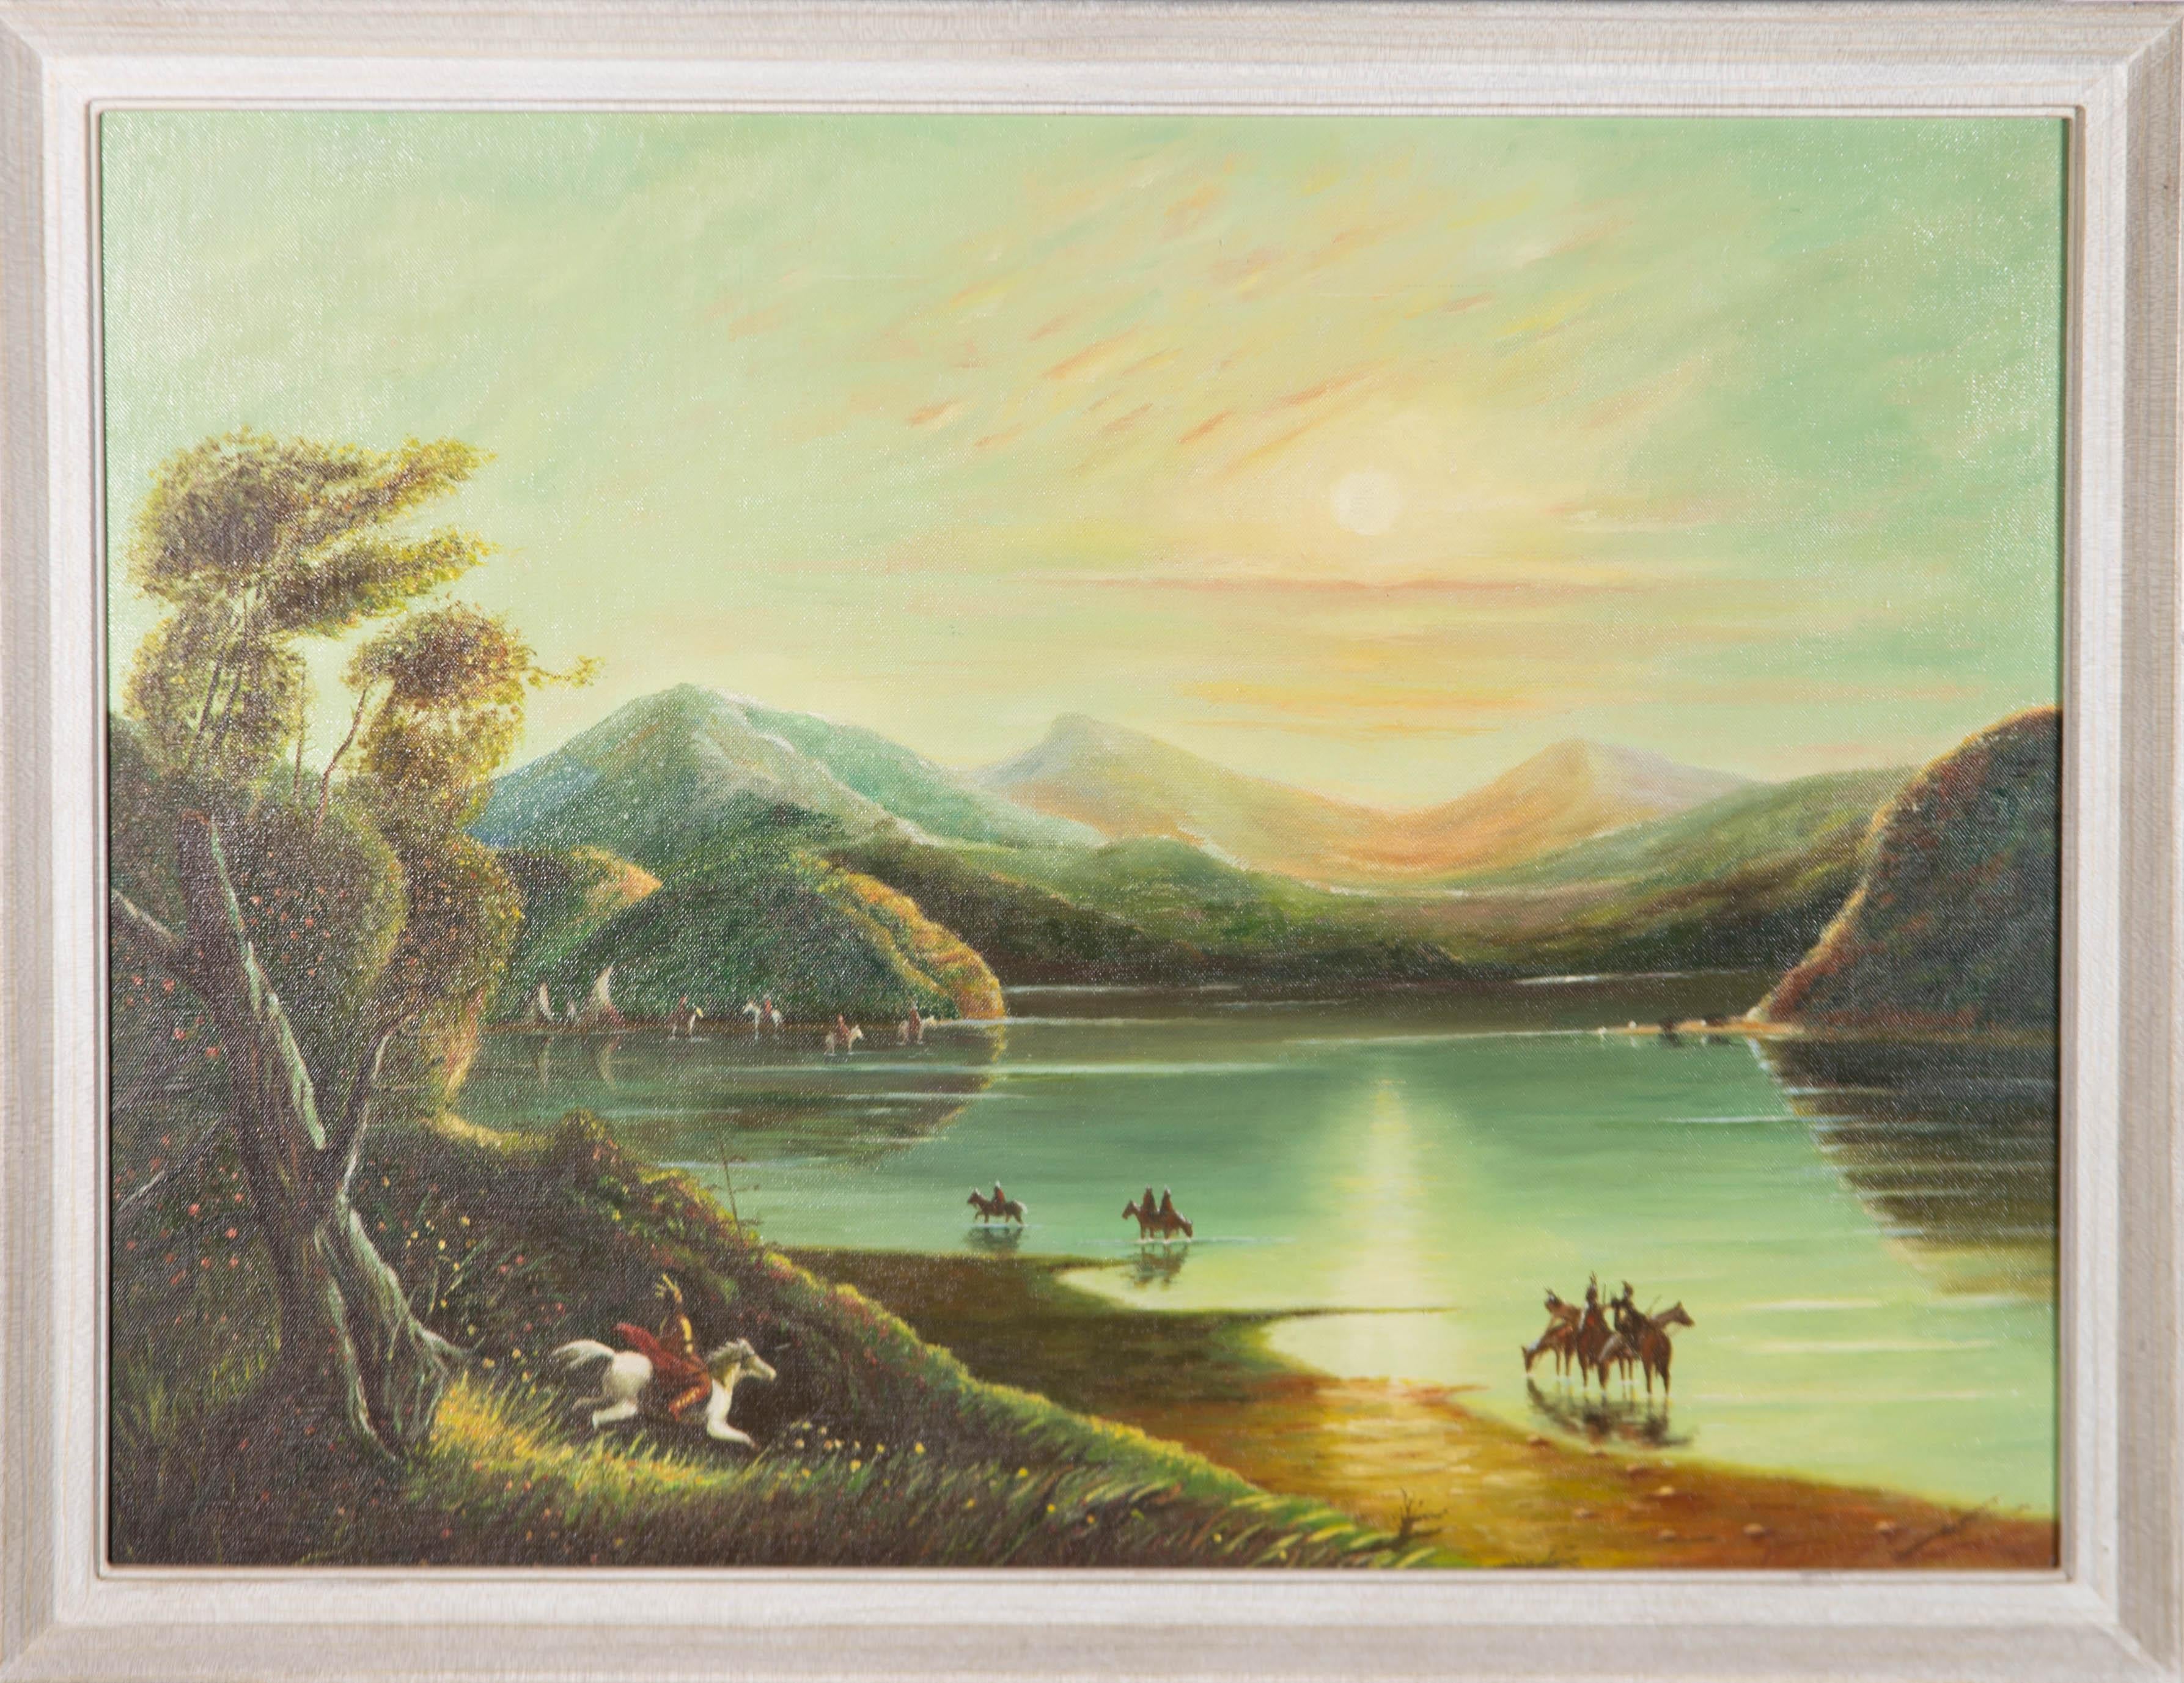 Unknown Landscape Painting - F. Dickons - Signed & Framed Mid 20th Century Oil, Native American Warriors